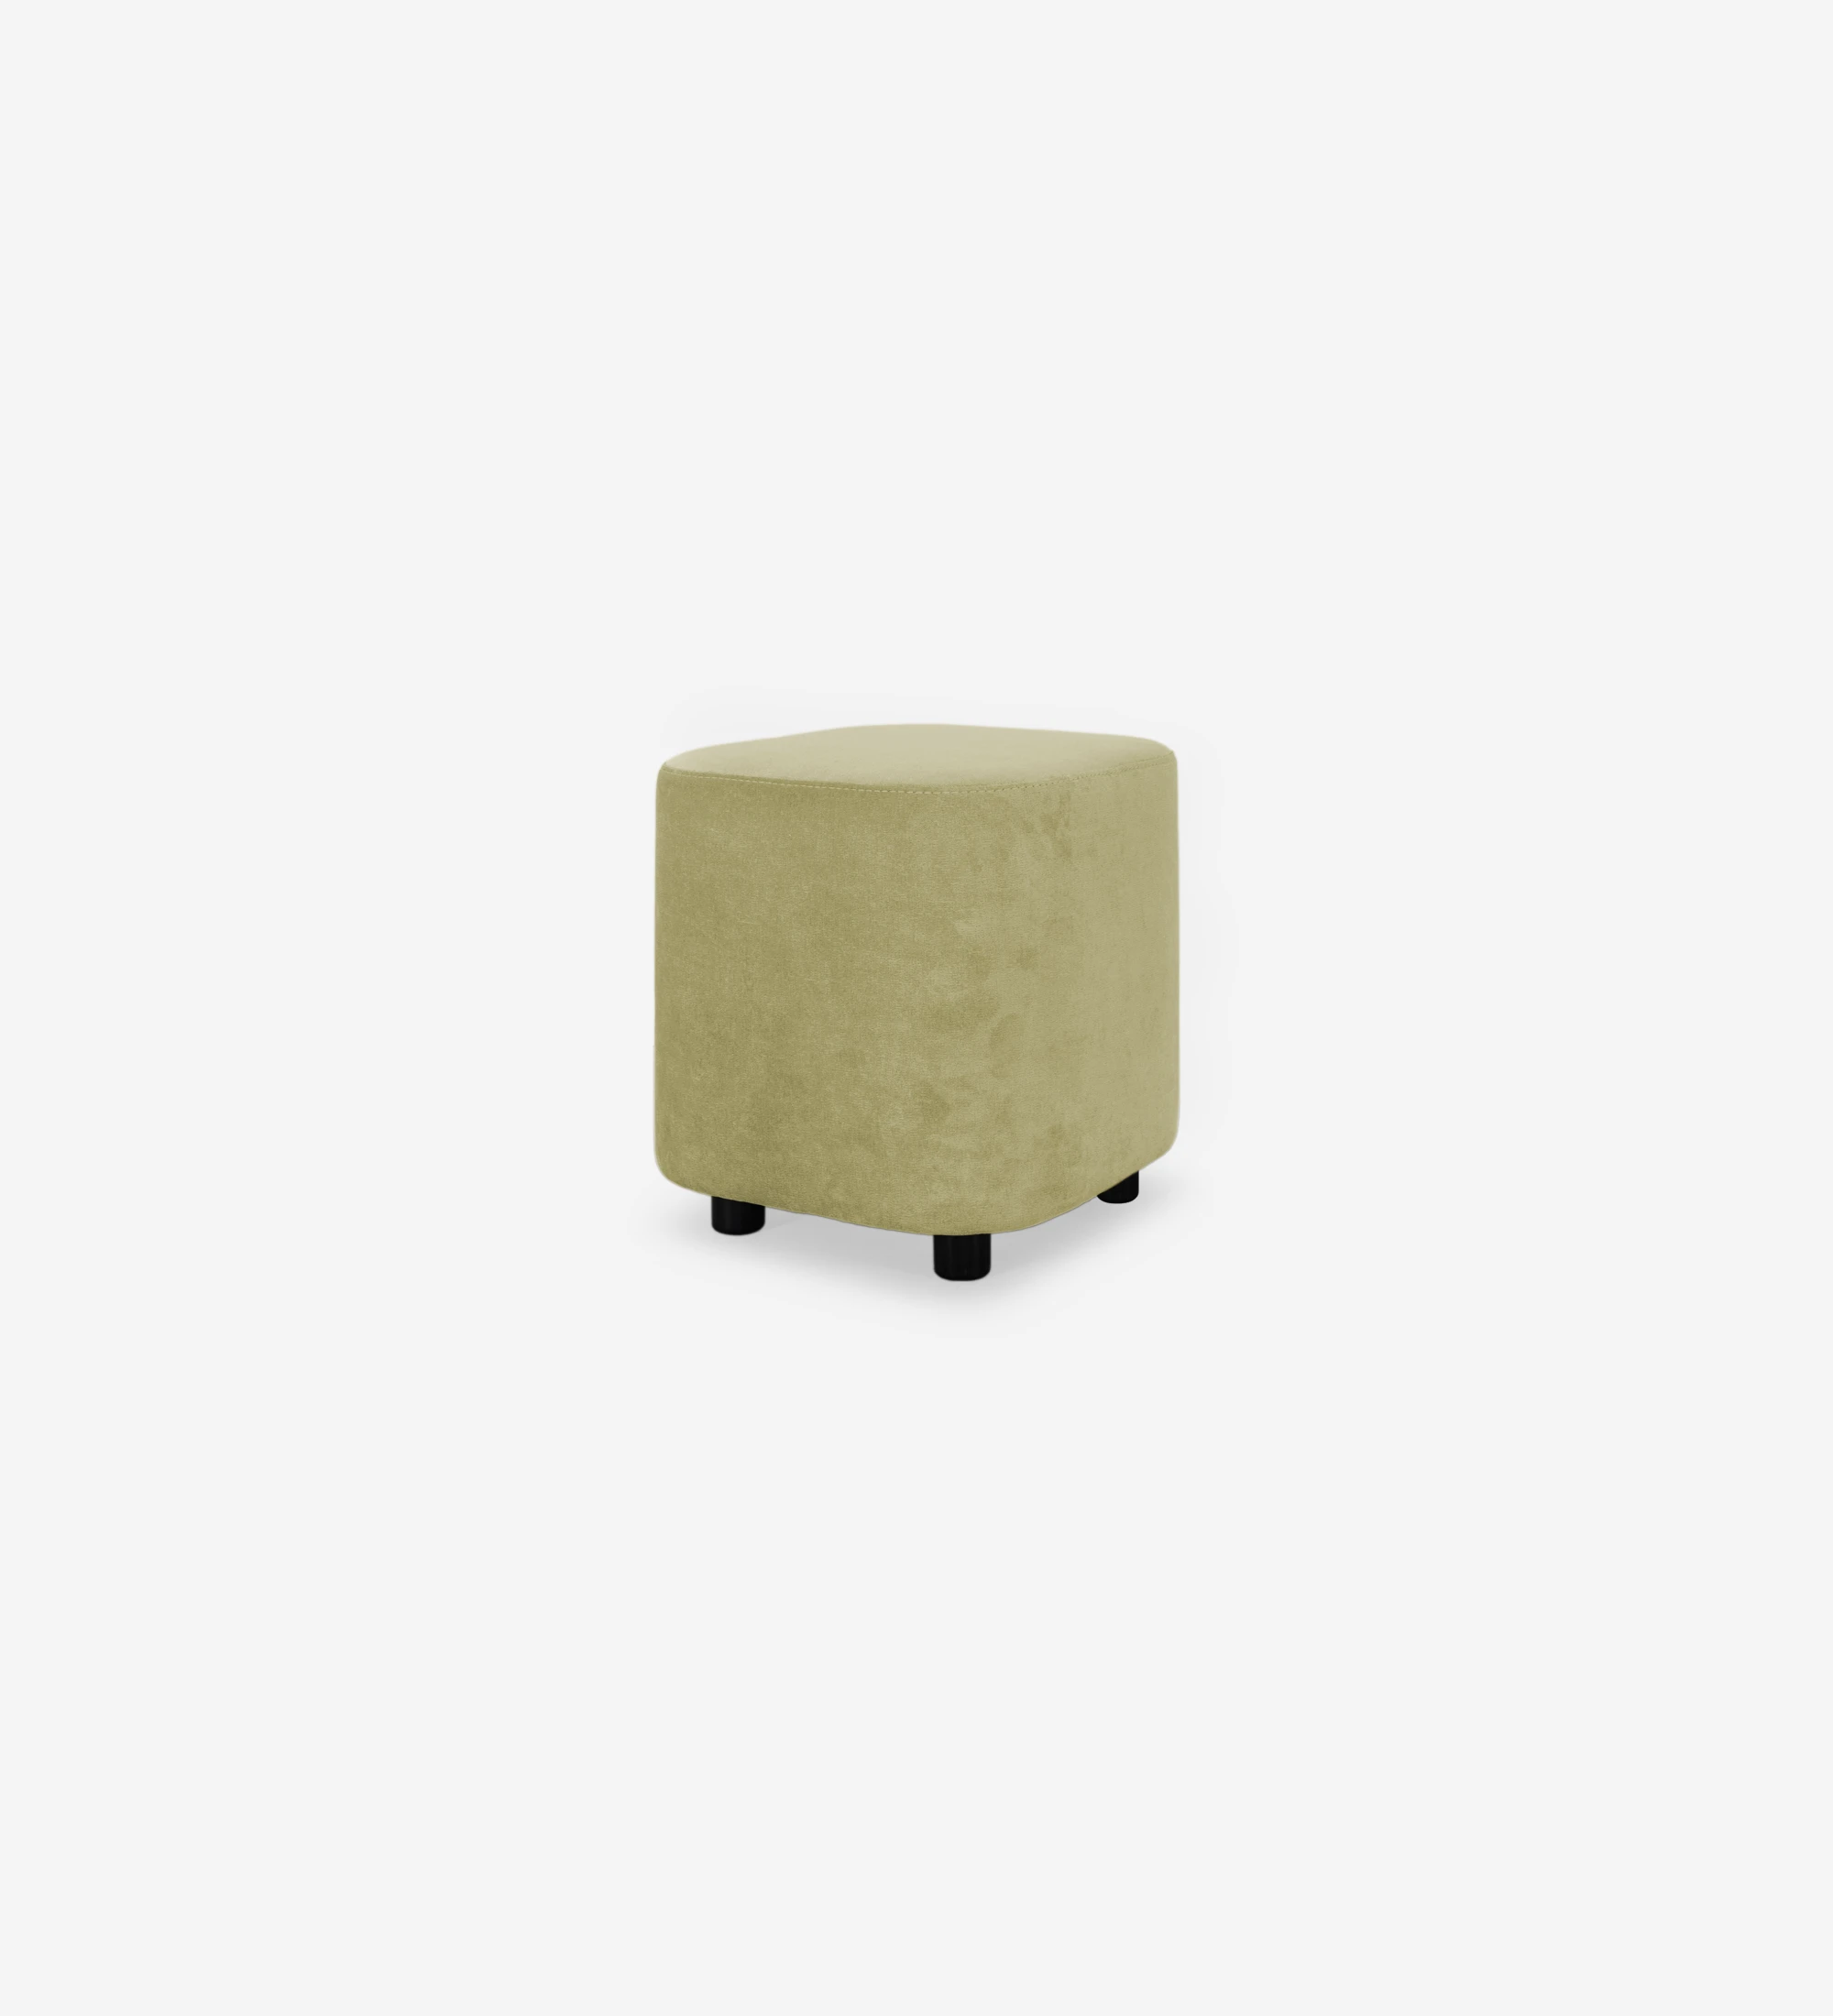 Cannes square puff, upholstered in green fabric, black feet, 40 x 40 cm.